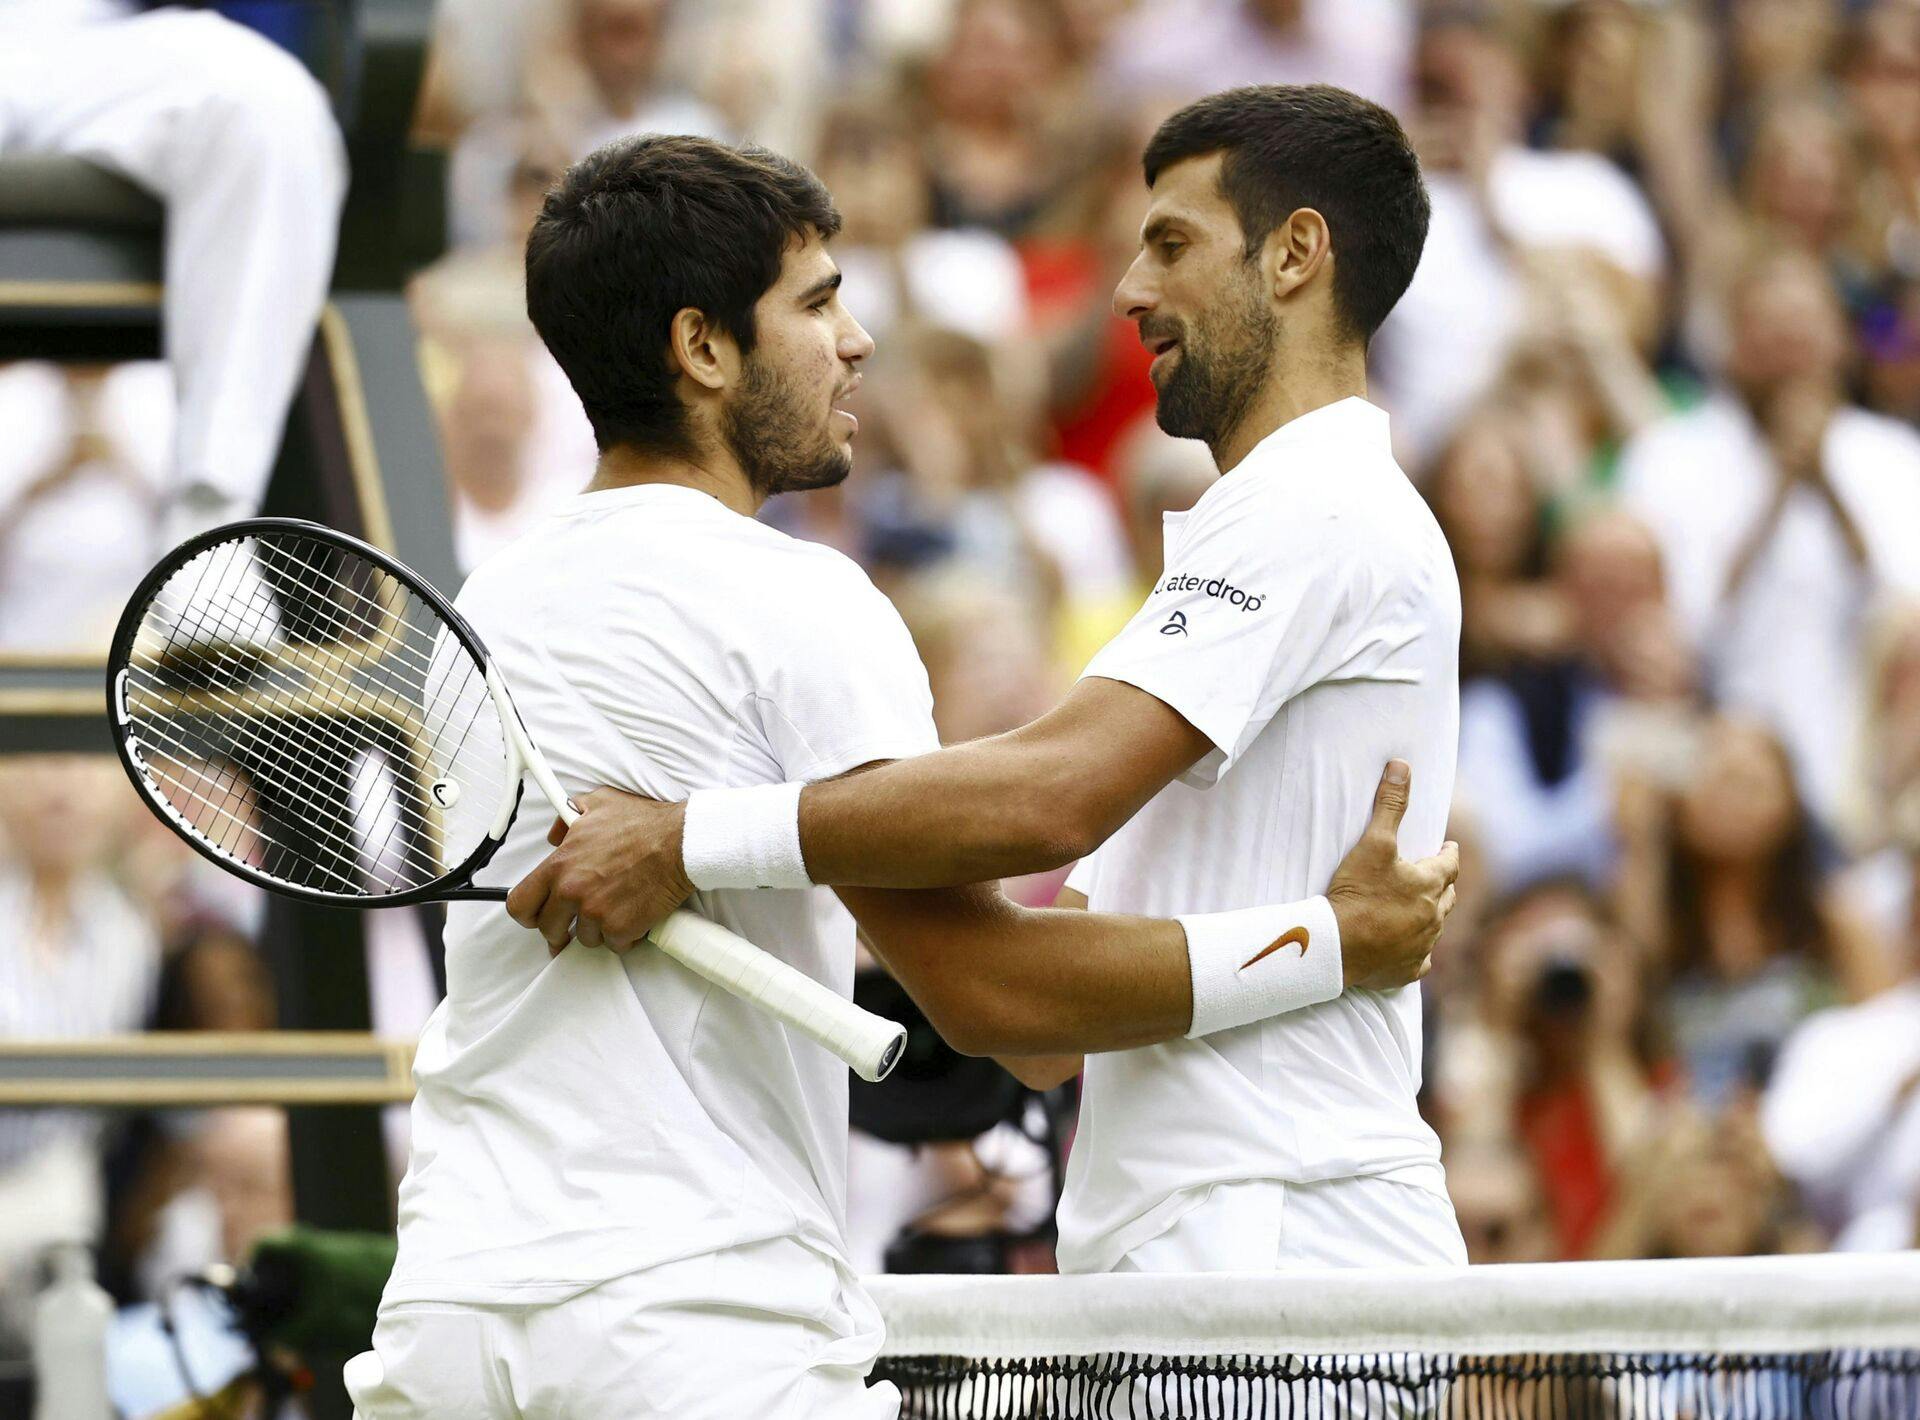 Spain's Carlos Alcaraz (L) hugs Serbia's Novak Djokovic after beating him in the men's singles final at the Wimbledon tennis tournament in London on July 16, 2023. (Kyodo via AP Images) ==Kyodo